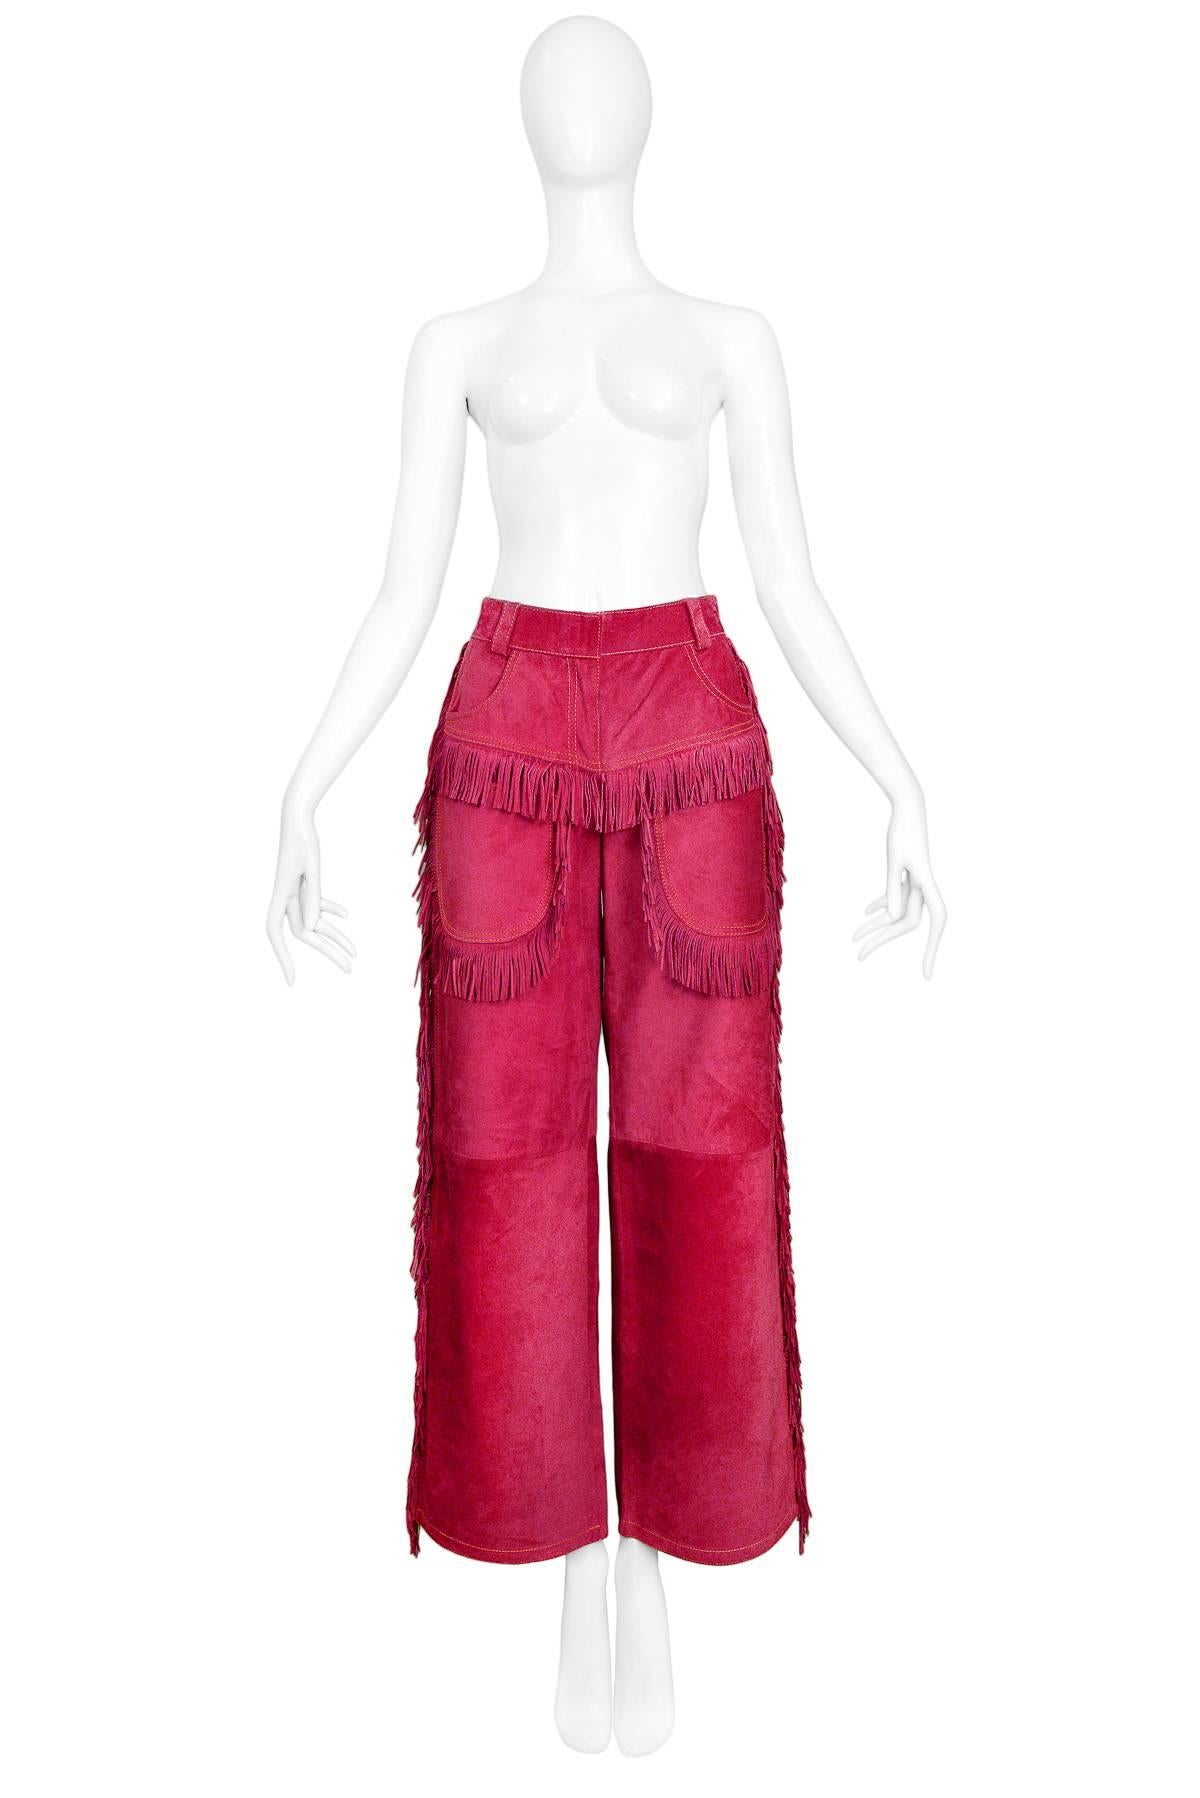 Vintage Gianni Versace iconic magenta suede Western inspired pants with patch pockets and fringe detail. Autumn/Winter 1992 Collection. 

New with Original Tags. Never worn.

Size: IT 40